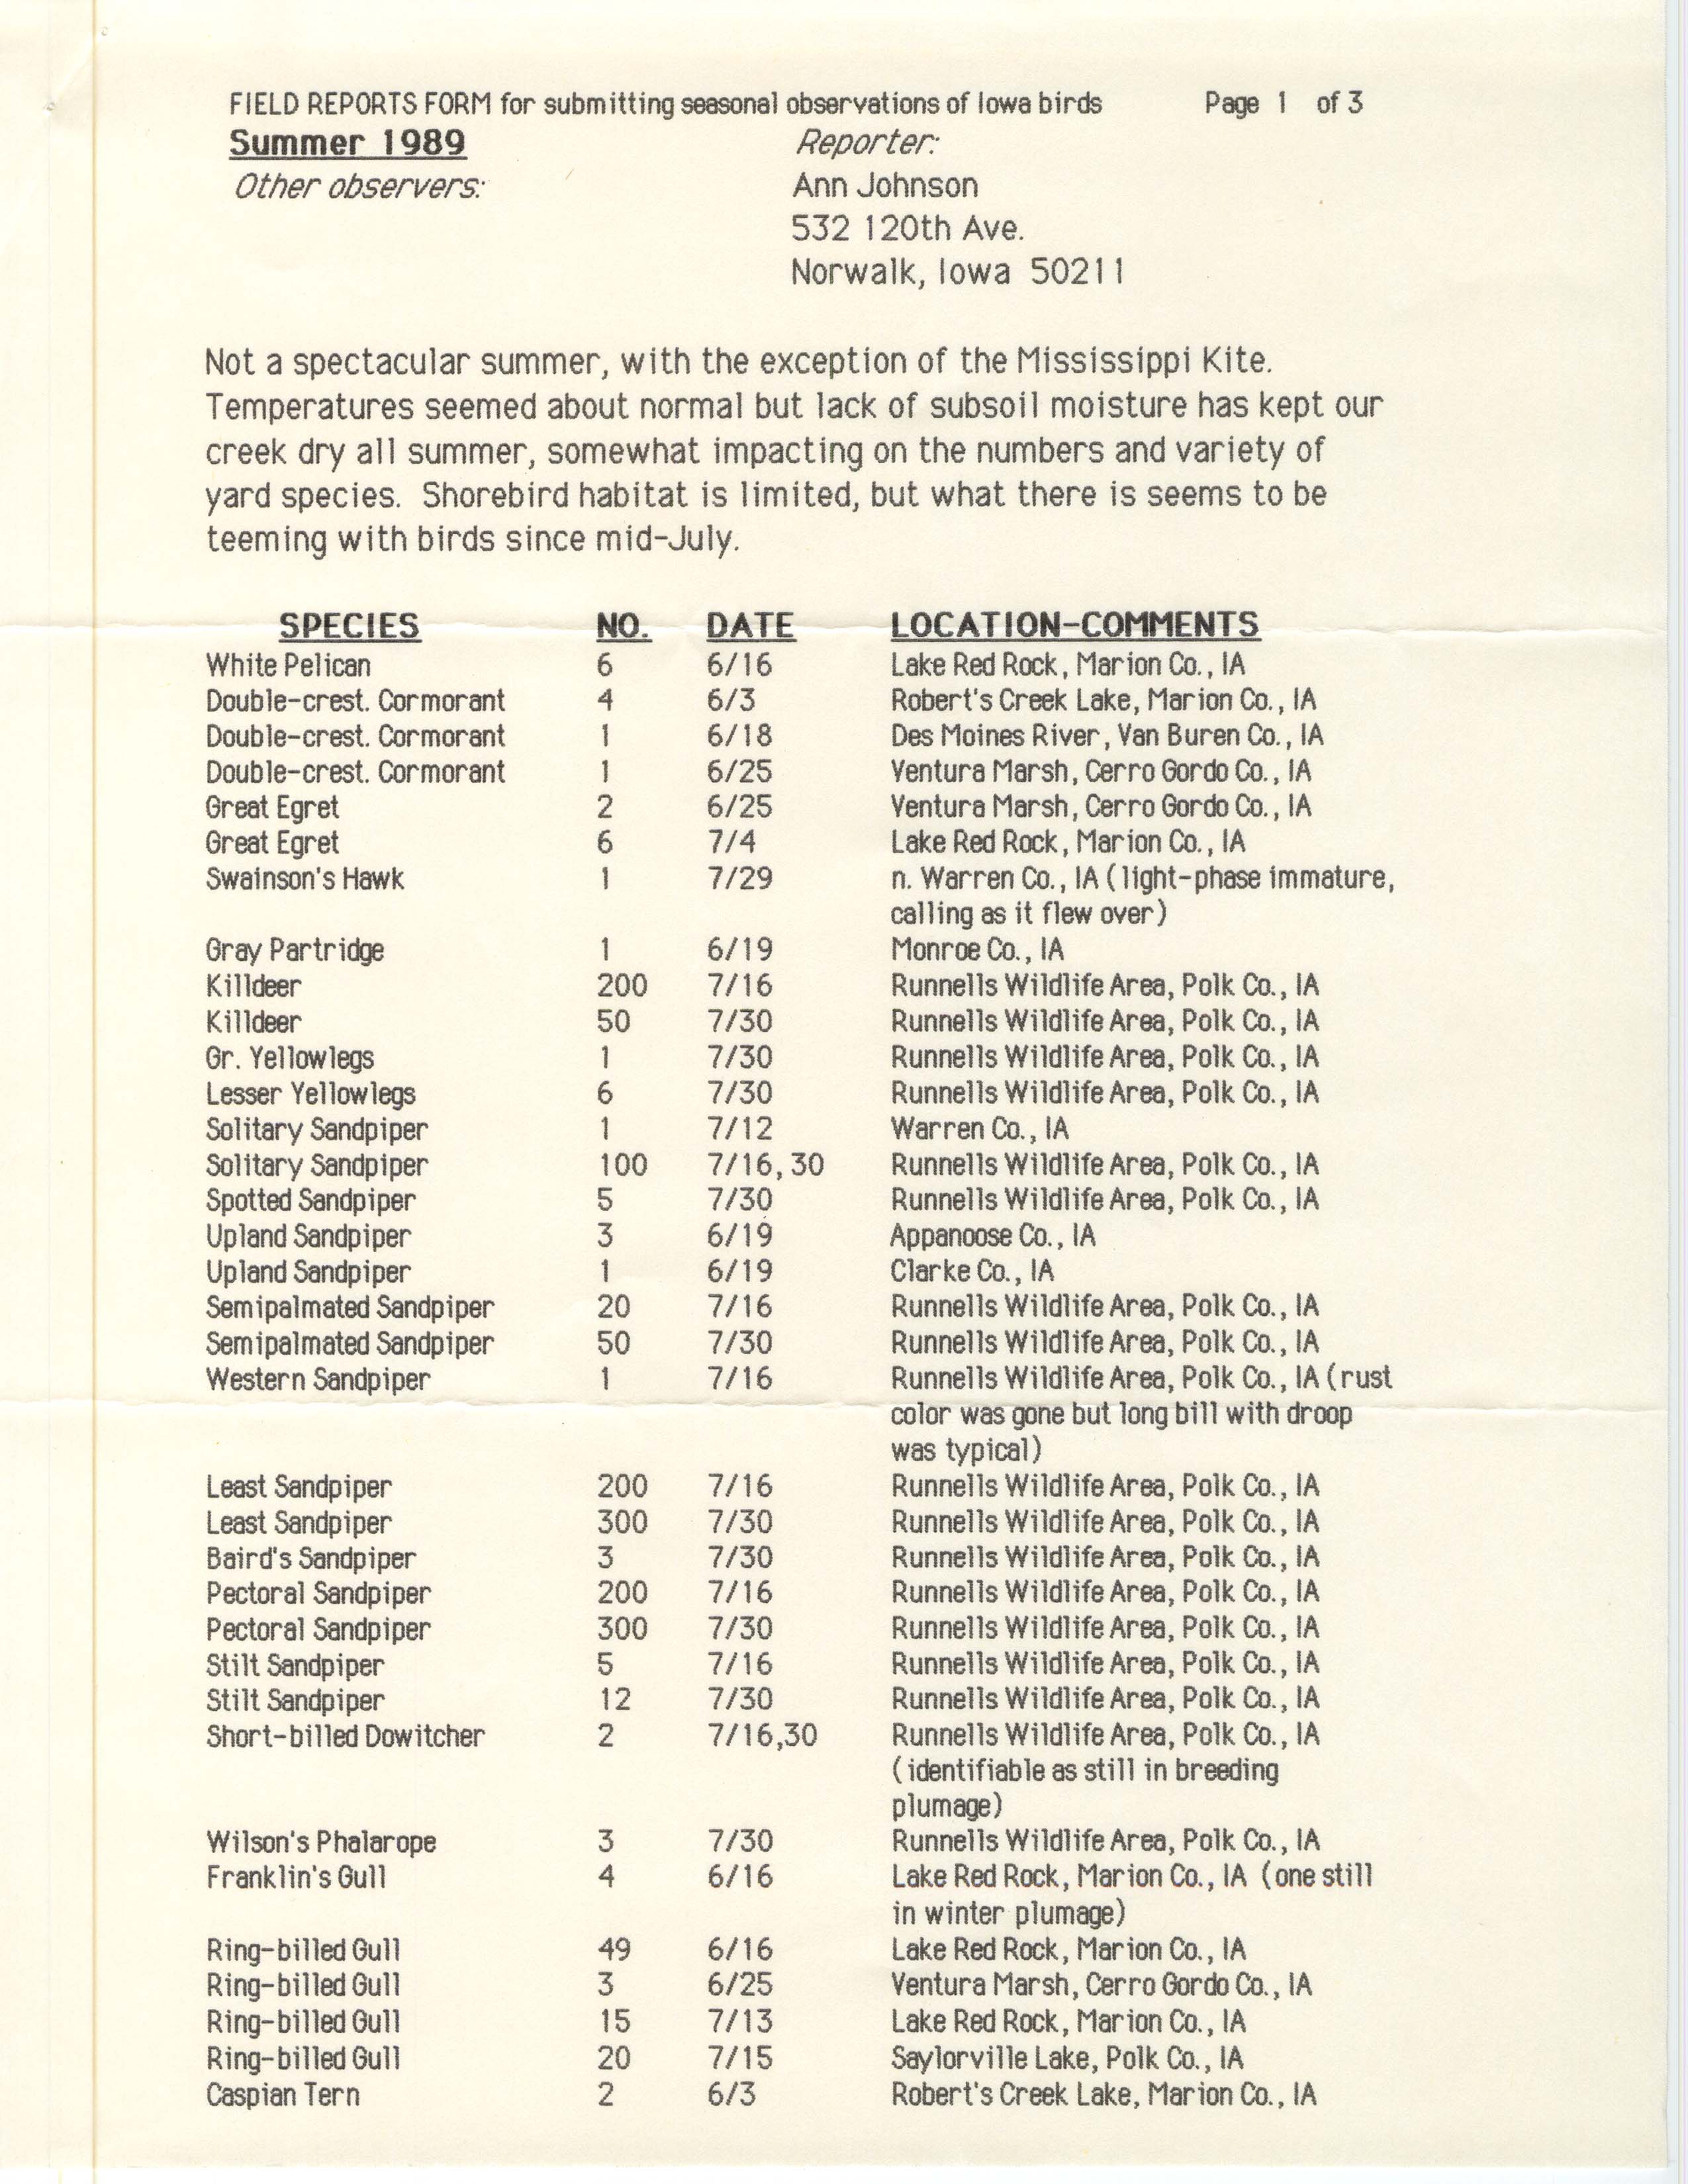 Field reports form for submitting seasonal observations of Iowa birds, Ann Johnson, summer 1989